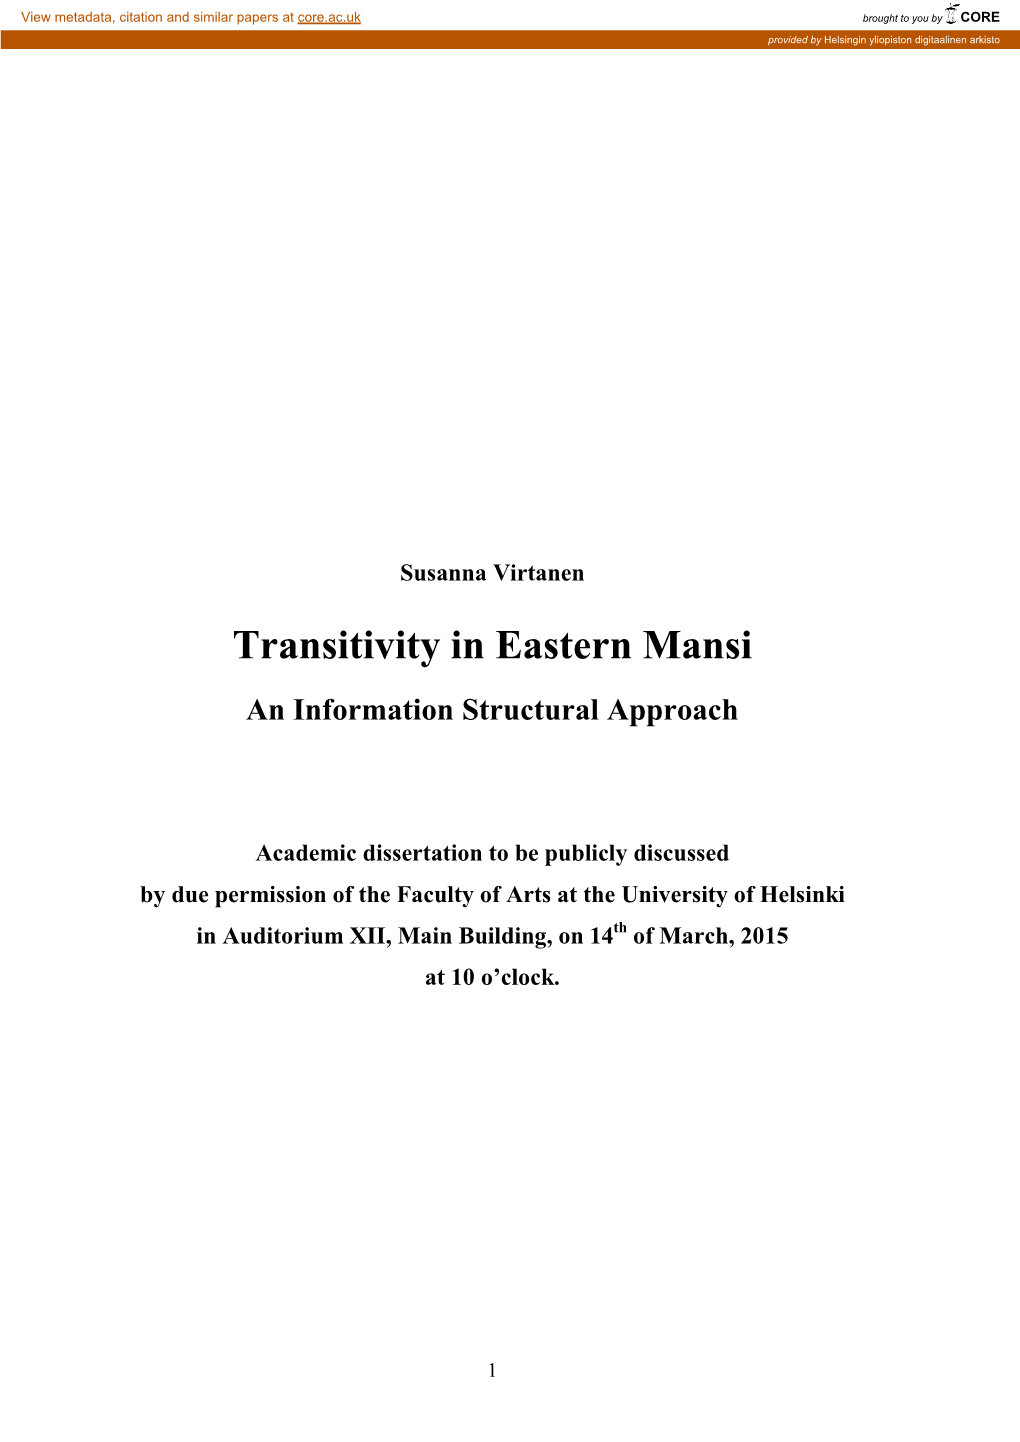 Transitivity in Eastern Mansi an Information Structural Approach